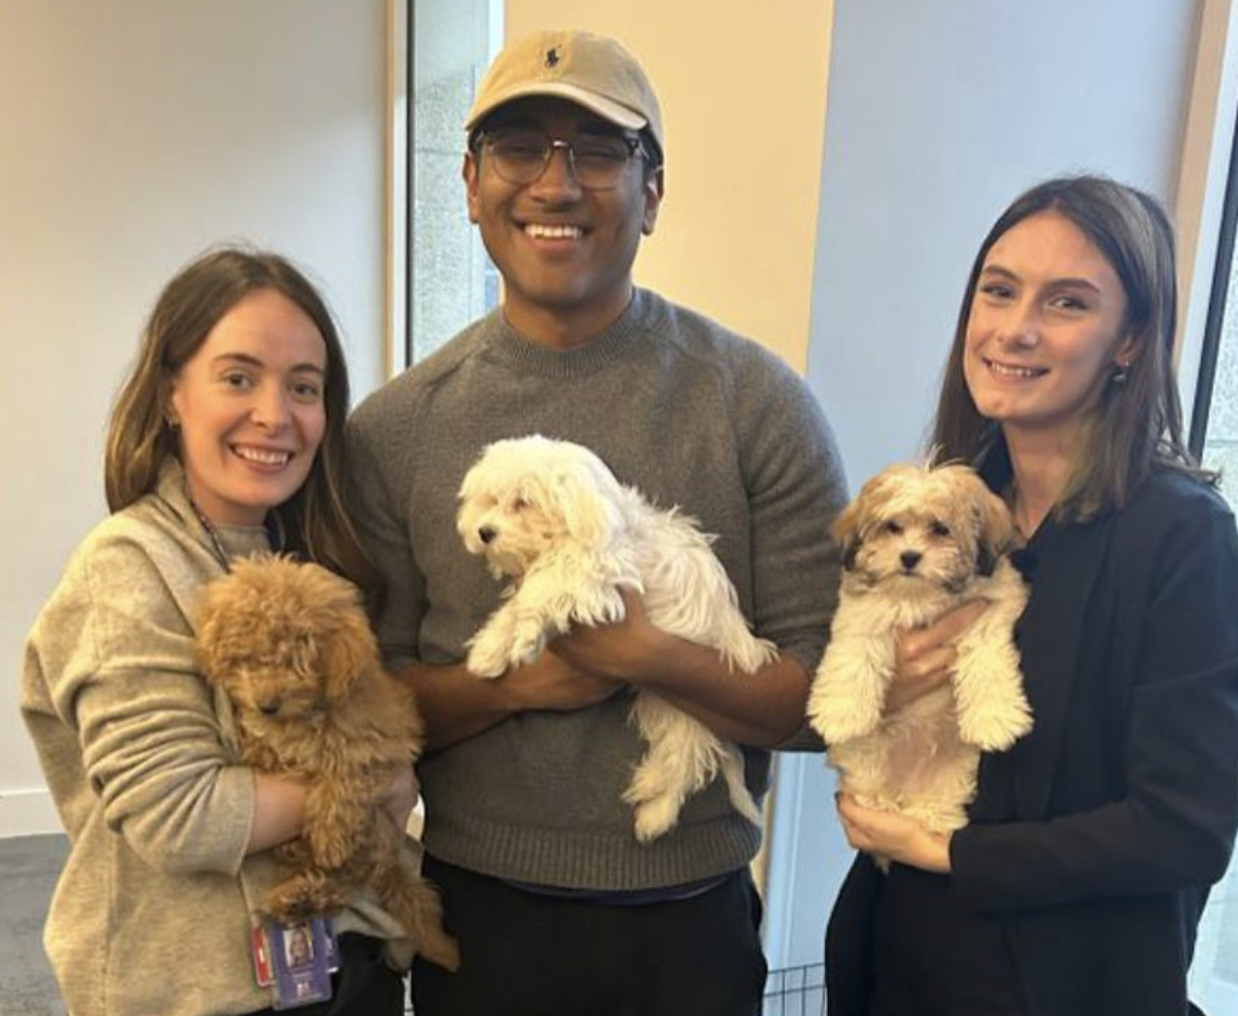 Students holding puppies and smiling.